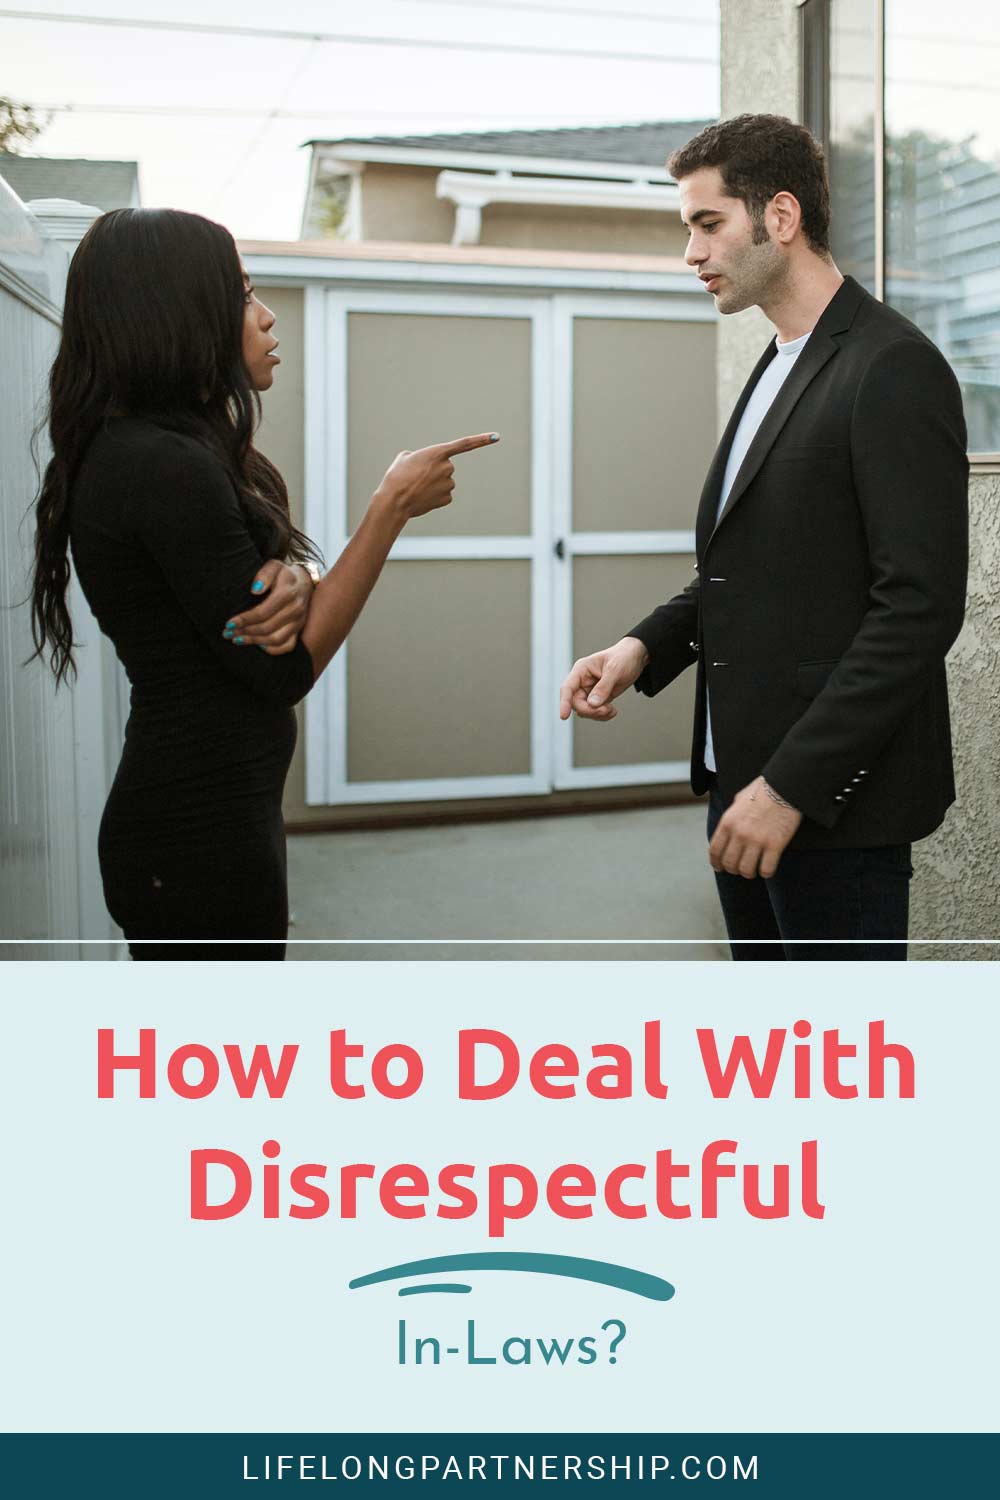 Woman having an argument with a man - How to Deal With Disrespectful In-Laws?